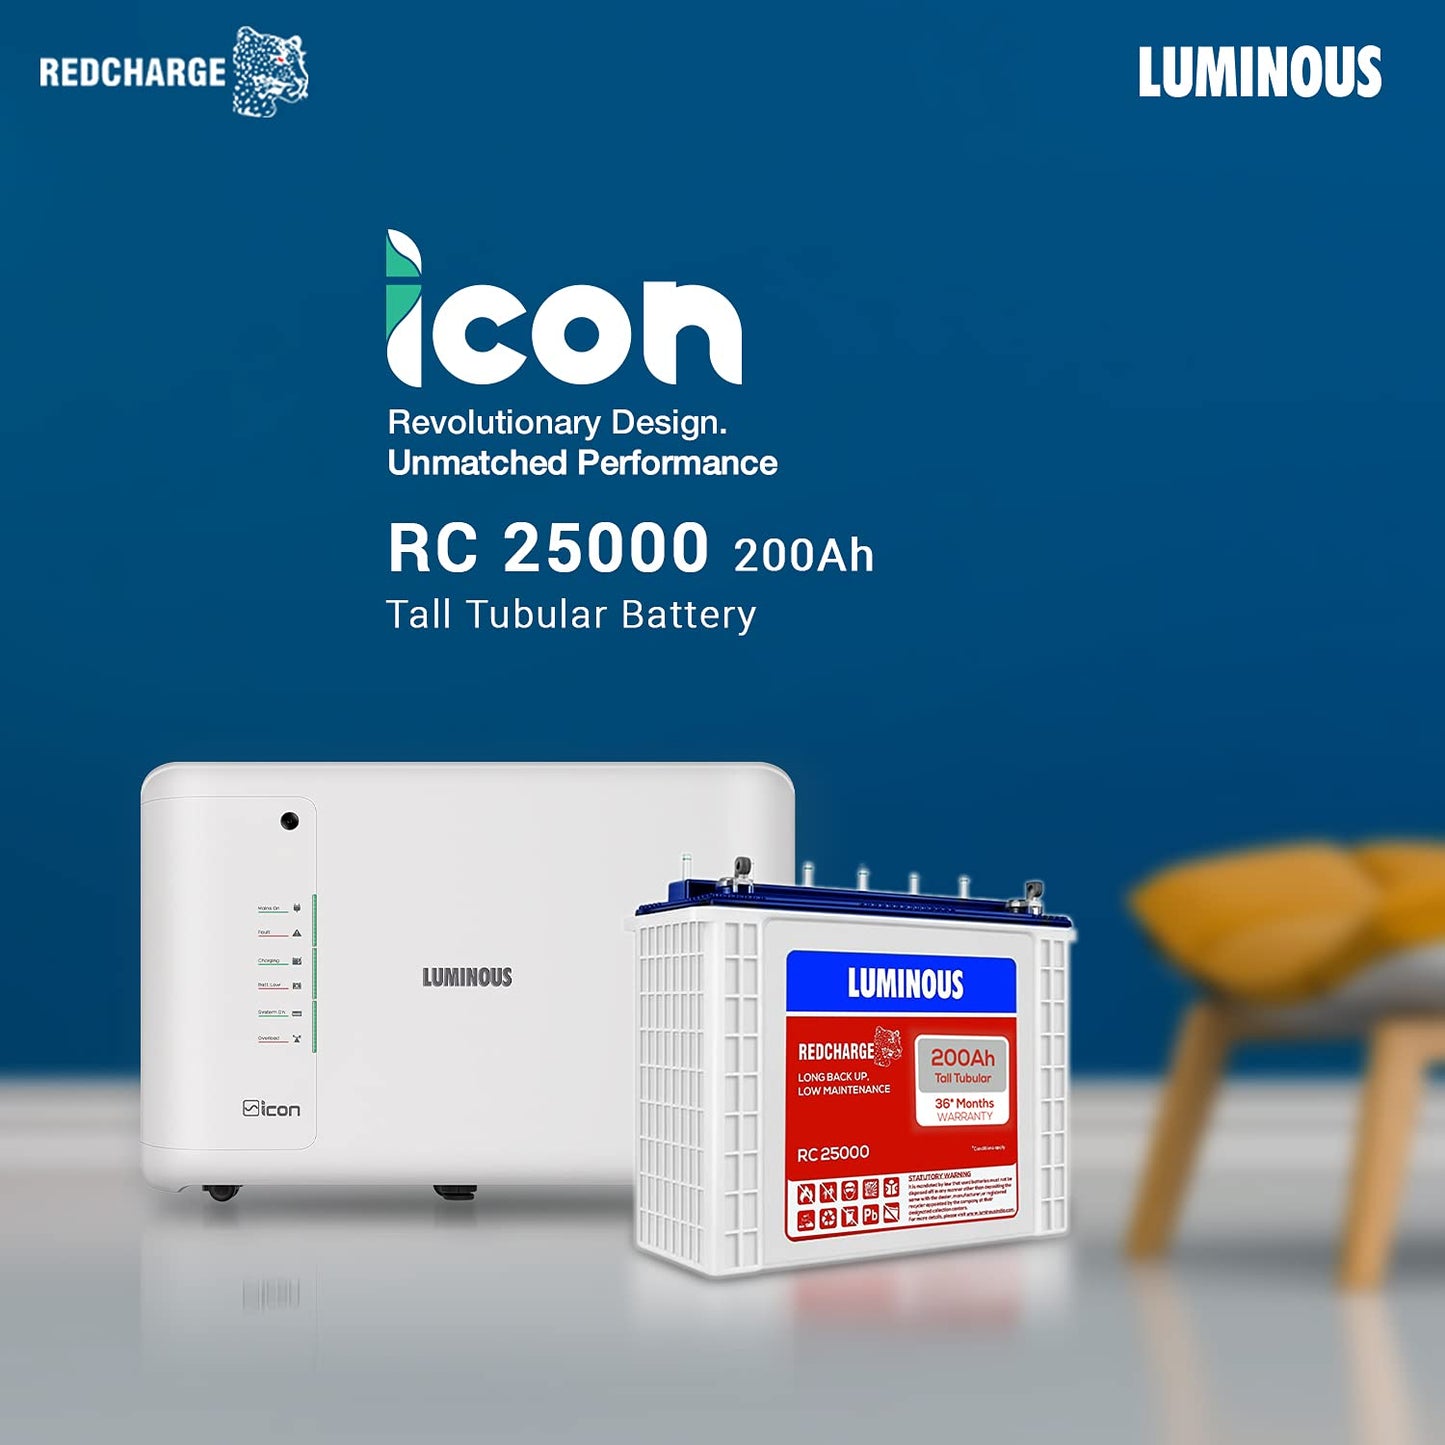 Luminous iCon 1100 Pure Sine Wave Inverter with RC25000 200Ah Tall Tubular Battery